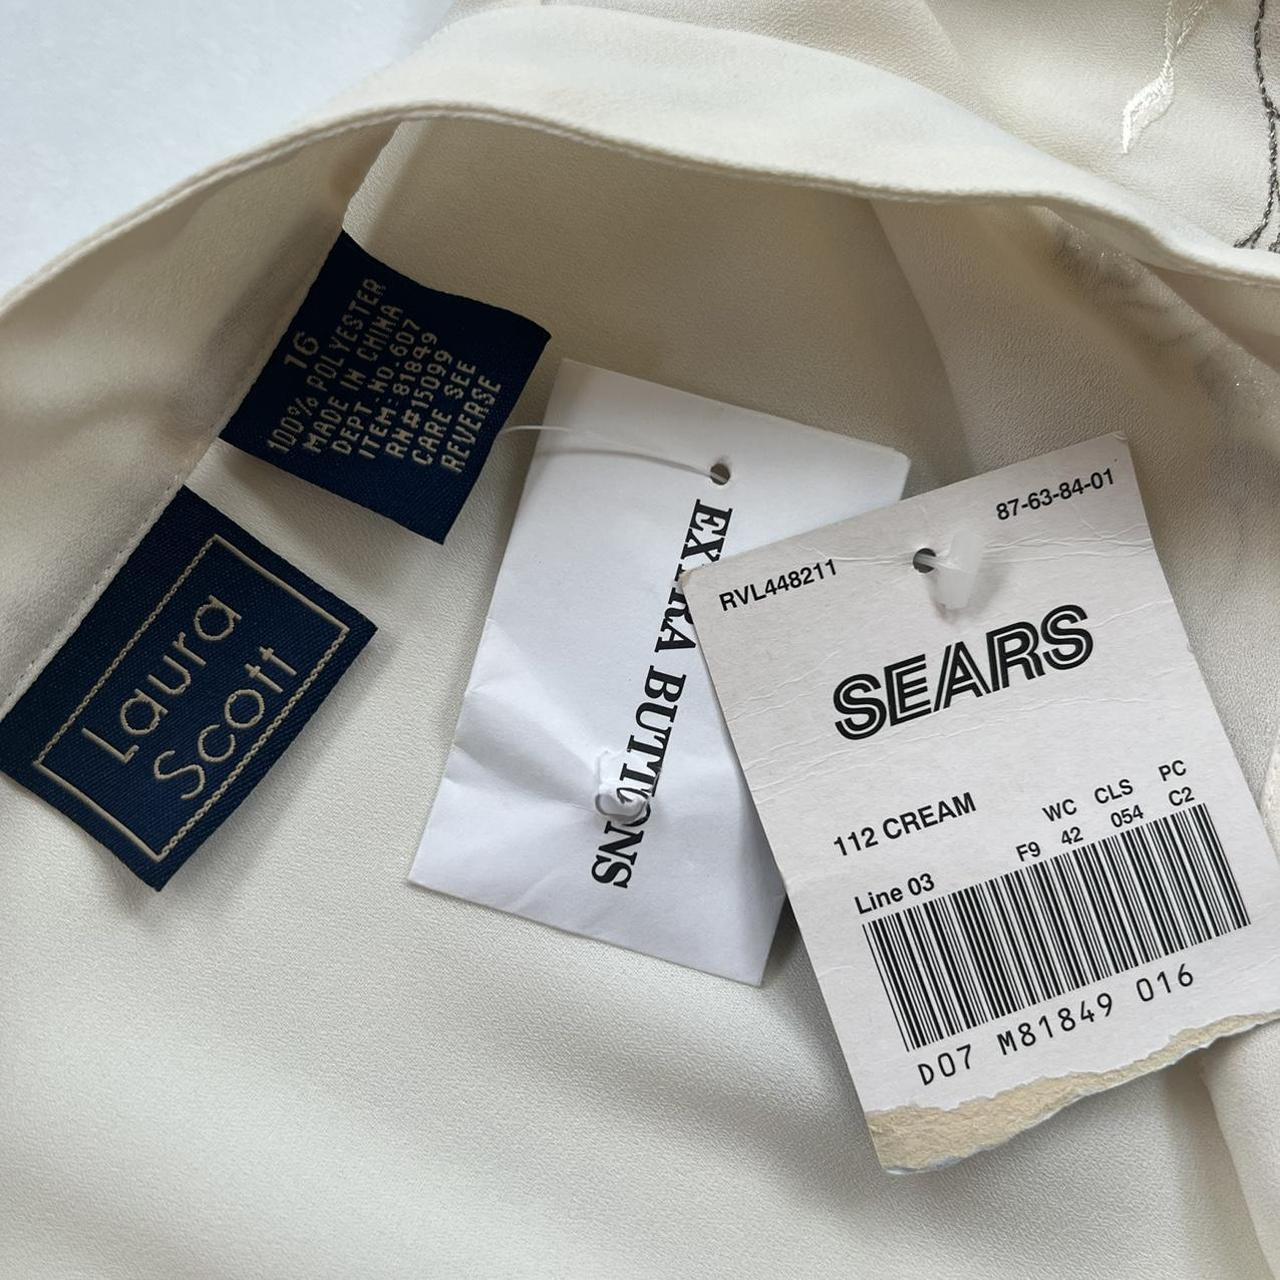 Sears Women's Cream and White Blouse (2)